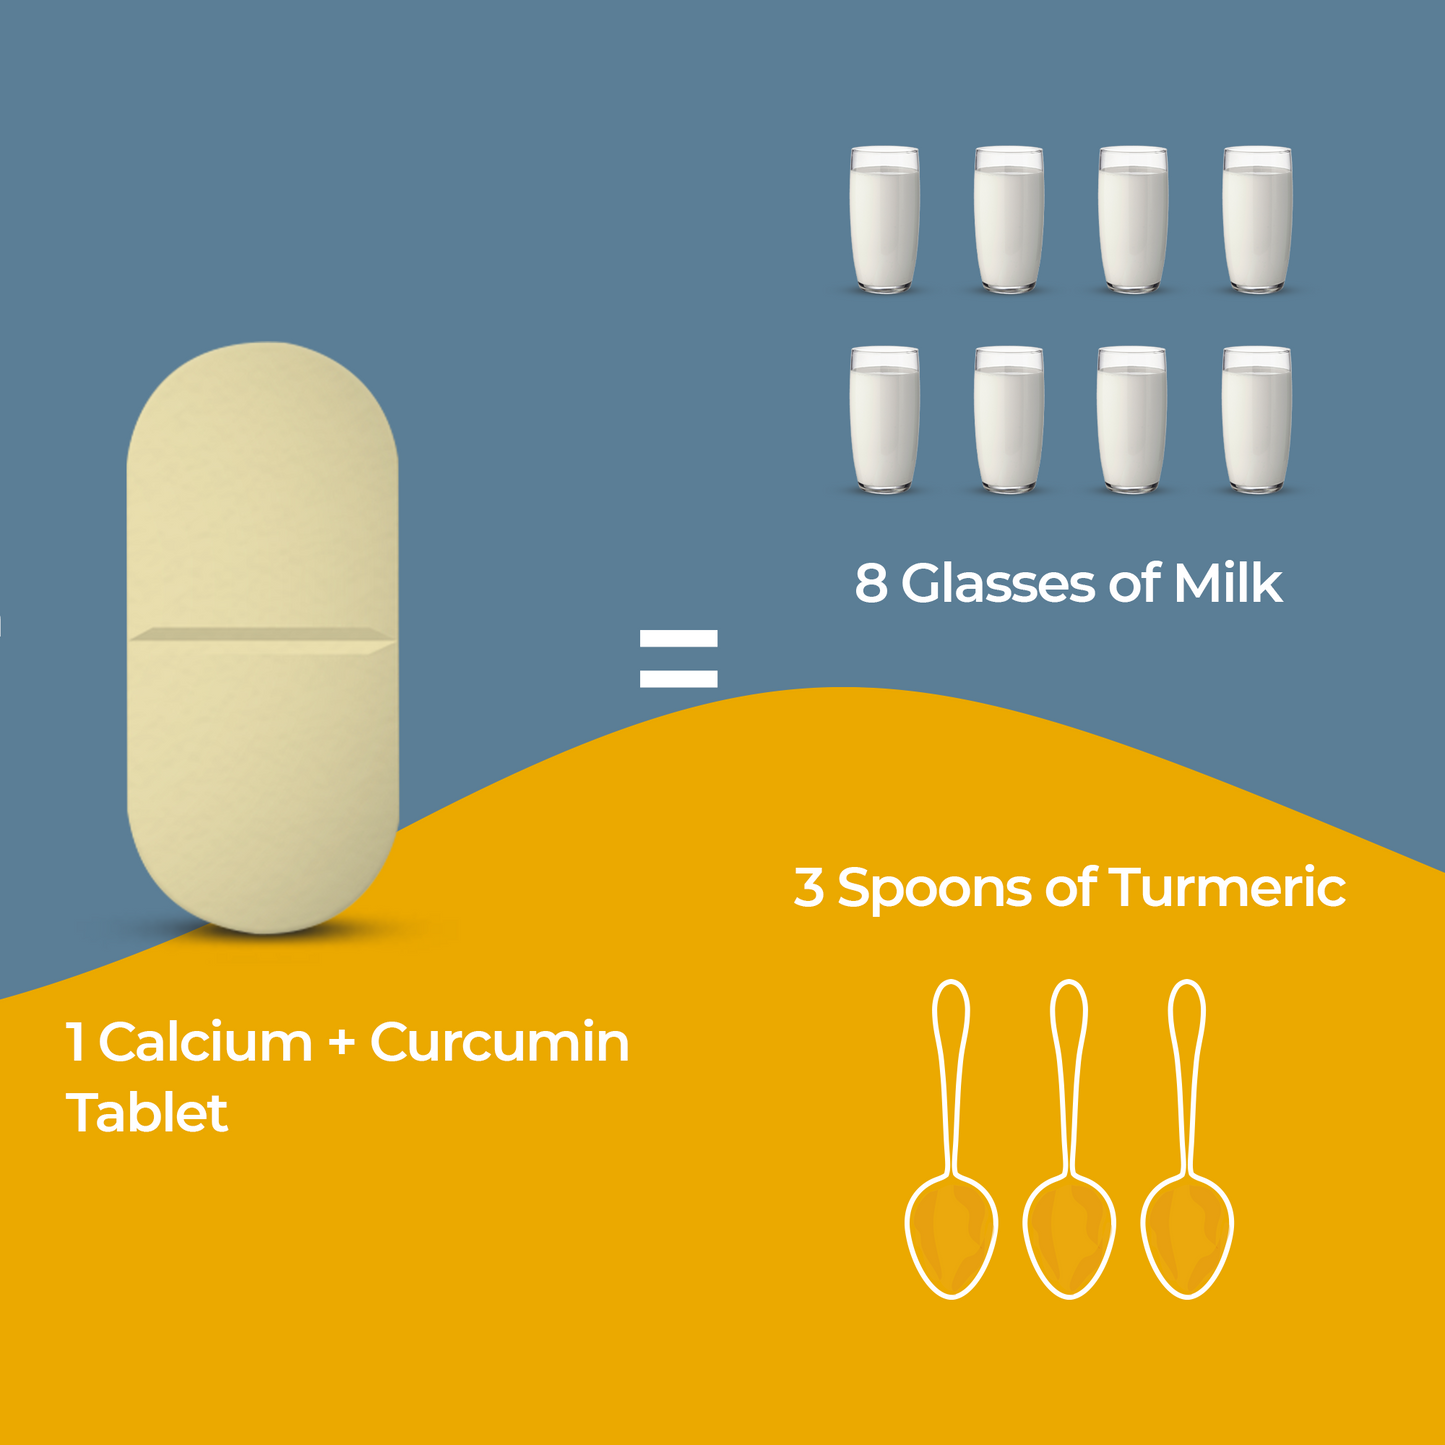 best calcium supplement for women's bones  one tablet equals eight glasses of milk and three spoons of turmeric 